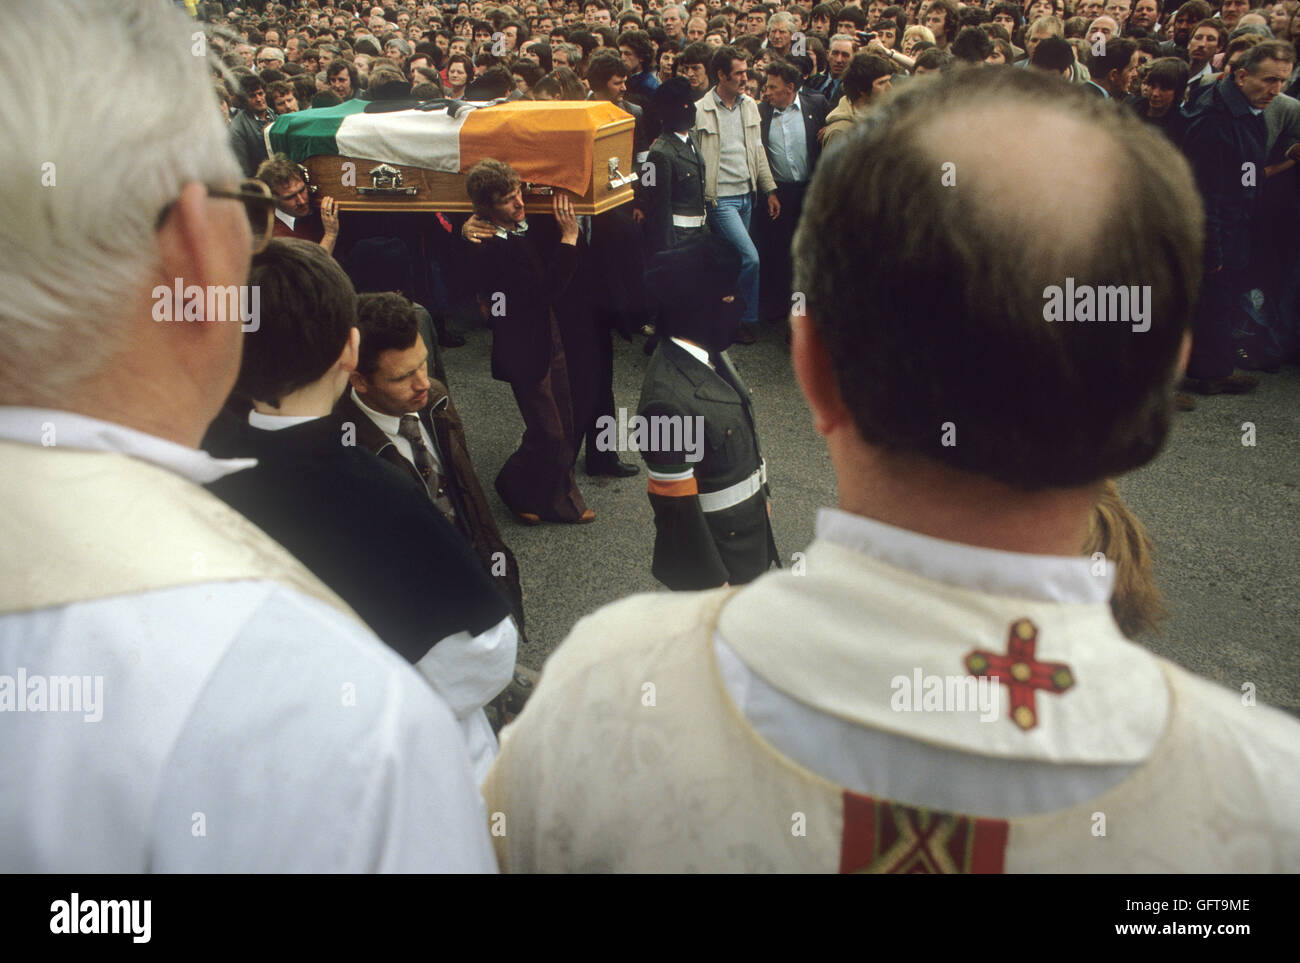 Martin Hurson funeral paramilitary IRA soldiers in disguise carry coffin July 1981  Galbally County Tyrone Northern Ireland. 1980s The Troubles, he died in Long Kesh on Hunger Strike HOMER SYKES Stock Photo